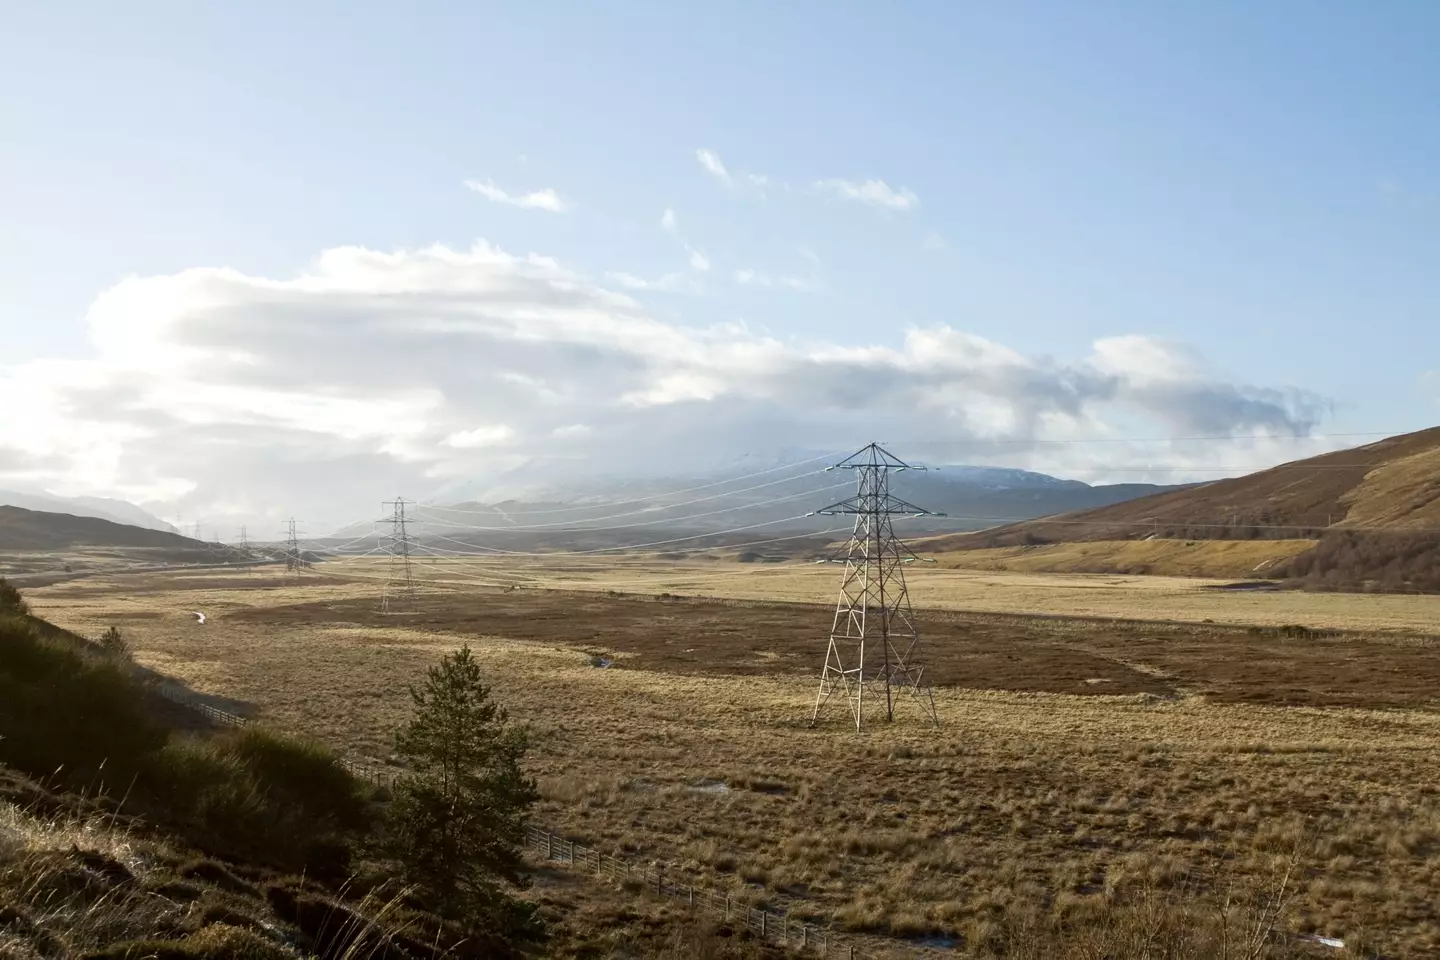 One script outlines how mains electricity could only be available in a few remote parts of Scotland.